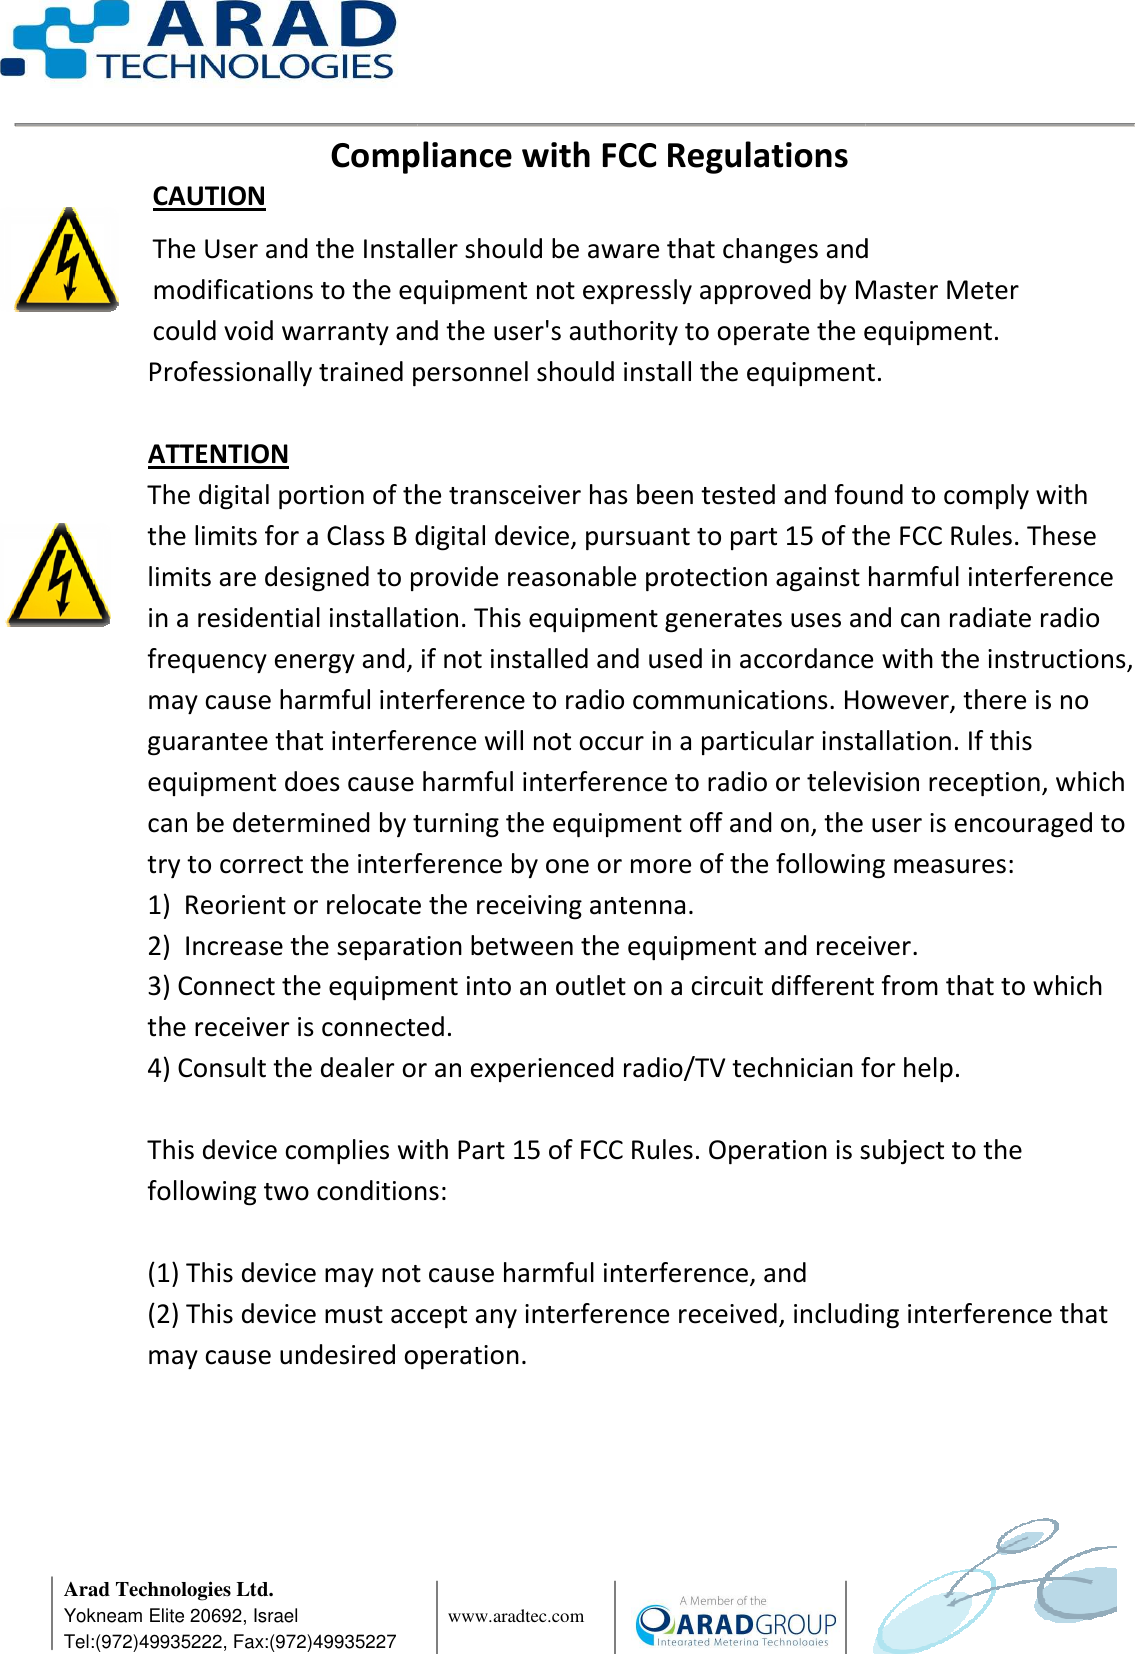      Arad Technologies Ltd. Yokneam Elite 20692, Israel Tel:(972)49935222, Fax:(972)49935227 Compliance with FCC Regulations CAUTION The User and the Installer should be aware that changes and modifications to the equipment not expressly approved by Master Meter could void warranty and the user&apos;s authority to operate the equipment.  Professionally trained personnel should install the eq  ATTENTION The digital portion of the transceiver has been tested and found to comply with the limits for a Class B digital device, pursuant to part 15 of the FCC Rules. These limits are designed to provide reasonable protection against harmful iin a residential installation. This equipment generates uses and can radiate radio frequency energy and, if not installed and used in accordance with the instructions, may cause harmful interference to radio communications. However, there is noguarantee that interference will not occur in a particular installation. If this equipment does cause harmful interference to radio or television reception, which can be determined by turning the equipment off and on, the user is encouraged to try to correct the interference by one or more of the following measures: 1)  Reorient or relocate the receiving antenna.2)  Increase the separation between the equipment and receiver.3) Connect the equipment into an outlet on a circuit different from that to wthe receiver is connected.4) Consult the dealer or an experienced radio/TV technician for help. This device complies with Part 15 of FCC Rules. Operation is subject to the following two conditions: (1) This device may not cause harmful (2) This device must accept any interference received, including interference that may cause undesired operation.                www.aradtec.com  Compliance with FCC RegulationsThe User and the Installer should be aware that changes and modifications to the equipment not expressly approved by Master Meter could void warranty and the user&apos;s authority to operate the equipment. Professionally trained personnel should install the equipment.The digital portion of the transceiver has been tested and found to comply with the limits for a Class B digital device, pursuant to part 15 of the FCC Rules. These limits are designed to provide reasonable protection against harmful iin a residential installation. This equipment generates uses and can radiate radio frequency energy and, if not installed and used in accordance with the instructions, may cause harmful interference to radio communications. However, there is noguarantee that interference will not occur in a particular installation. If this equipment does cause harmful interference to radio or television reception, which can be determined by turning the equipment off and on, the user is encouraged to ect the interference by one or more of the following measures: )  Reorient or relocate the receiving antenna. )  Increase the separation between the equipment and receiver.) Connect the equipment into an outlet on a circuit different from that to wthe receiver is connected. ) Consult the dealer or an experienced radio/TV technician for help.This device complies with Part 15 of FCC Rules. Operation is subject to the following two conditions: (1) This device may not cause harmful interference, and (2) This device must accept any interference received, including interference that may cause undesired operation.      The User and the Installer should be aware that changes and modifications to the equipment not expressly approved by Master Meter could void warranty and the user&apos;s authority to operate the equipment. uipment.The digital portion of the transceiver has been tested and found to comply with the limits for a Class B digital device, pursuant to part 15 of the FCC Rules. These limits are designed to provide reasonable protection against harmful interference in a residential installation. This equipment generates uses and can radiate radio frequency energy and, if not installed and used in accordance with the instructions, may cause harmful interference to radio communications. However, there is no guarantee that interference will not occur in a particular installation. If this equipment does cause harmful interference to radio or television reception, which can be determined by turning the equipment off and on, the user is encouraged to ect the interference by one or more of the following measures:  )  Increase the separation between the equipment and receiver. ) Connect the equipment into an outlet on a circuit different from that to which ) Consult the dealer or an experienced radio/TV technician for help. This device complies with Part 15 of FCC Rules. Operation is subject to the (2) This device must accept any interference received, including interference that 